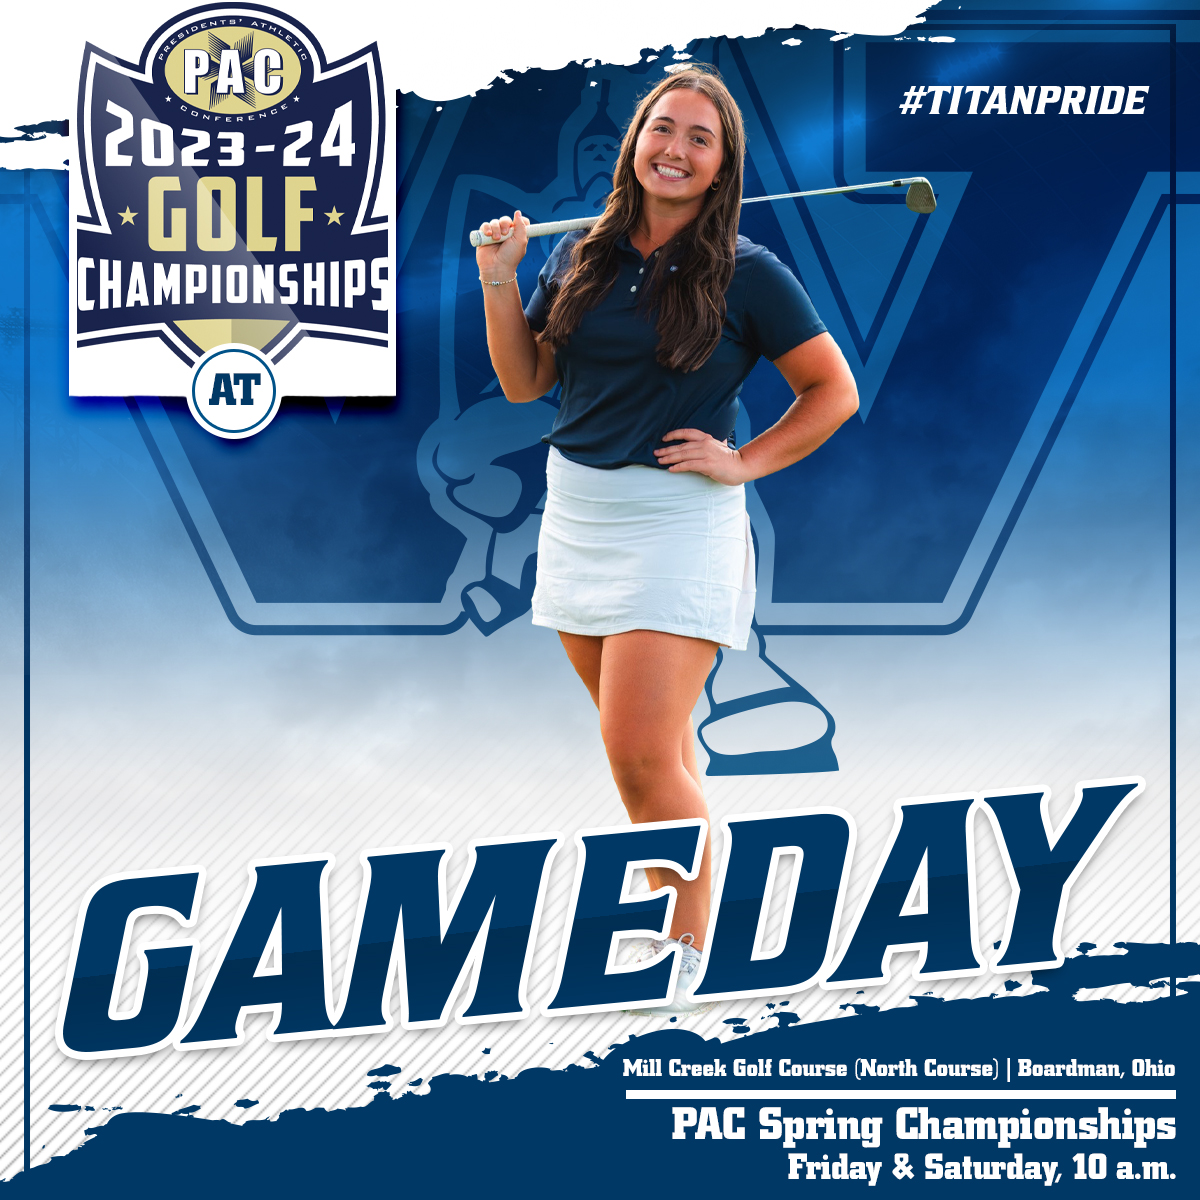 Women's golf will compete in the PAC Spring Championships at Mill Creek Golf Course (North Course). Rounds three and four are set for Friday and Saturday. Good luck Titans!

🆚PAC Spring Championships
🕙10 a.m.
📍Boardman, Ohio

#d3wgolf #pacwgolf #titanpride⚔️